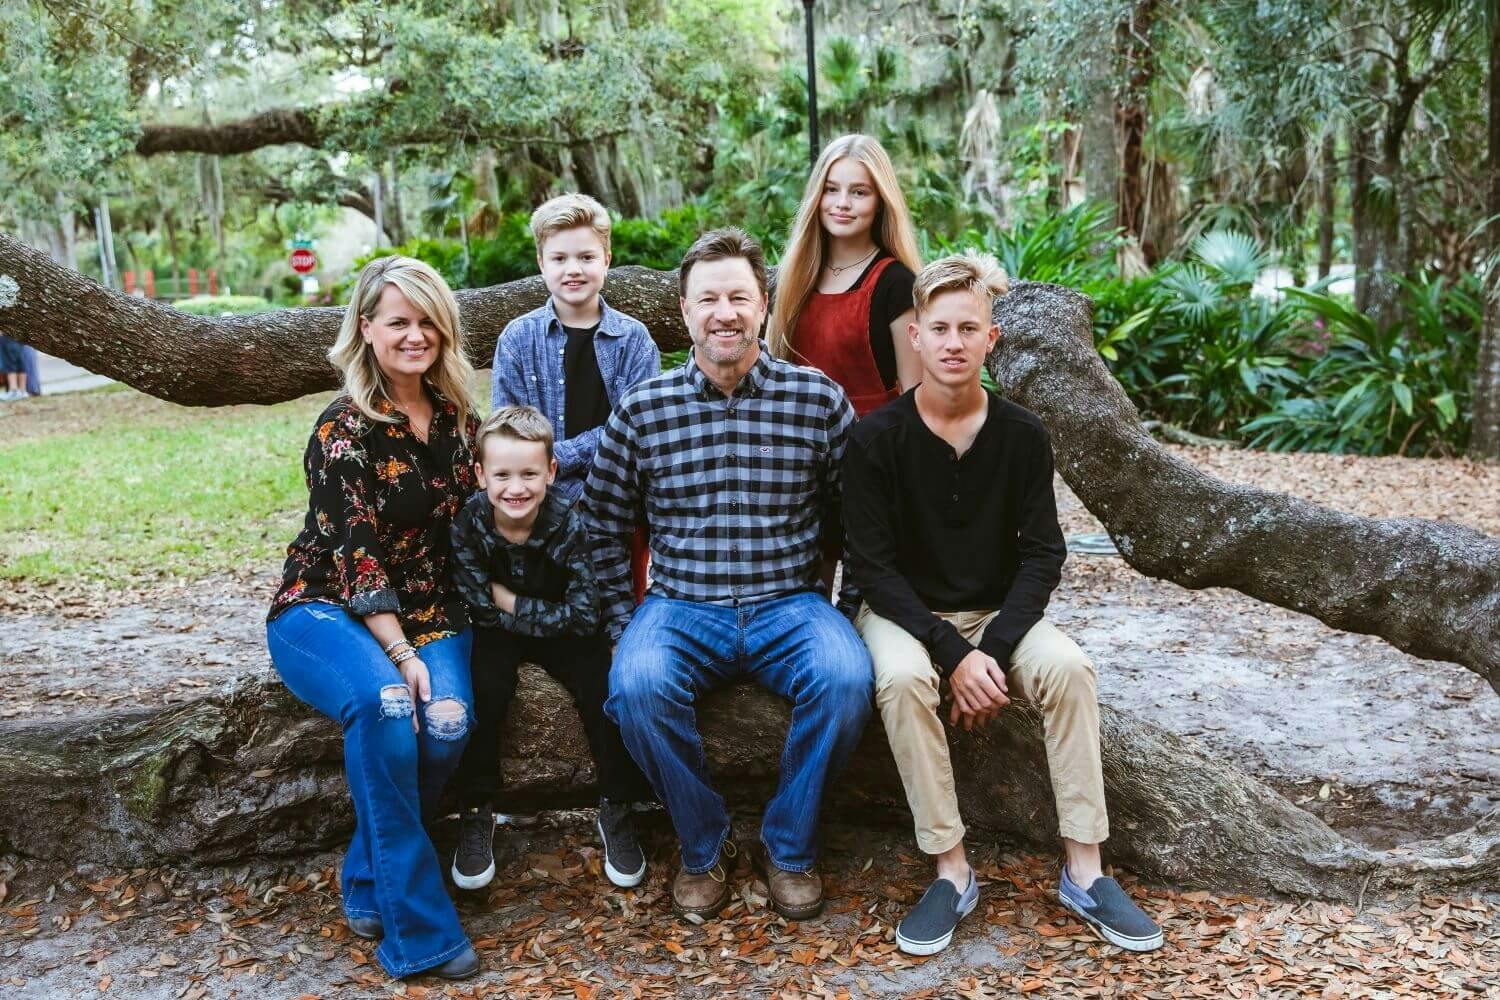 A family of six smiling and sitting on a large tree branch in a park setting.